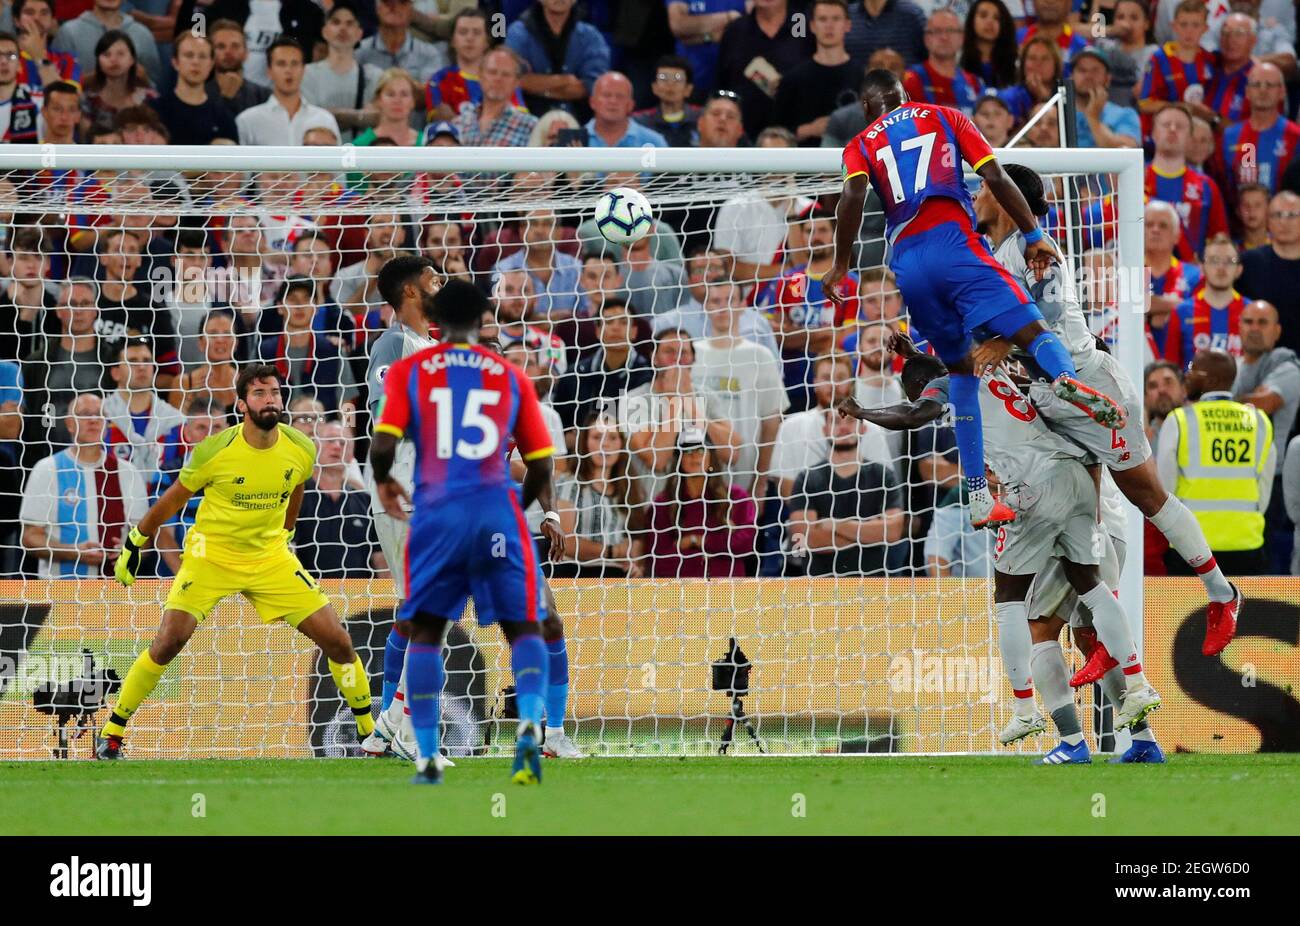 Soccer Football - Premier League - Crystal Palace v Liverpool - Selhurst Park, London, Britain - August 20, 2018  Crystal Palace's Christian Benteke heads at goal                     REUTERS/Eddie Keogh  EDITORIAL USE ONLY. No use with unauthorized audio, video, data, fixture lists, club/league logos or 'live' services. Online in-match use limited to 75 images, no video emulation. No use in betting, games or single club/league/player publications.  Please contact your account representative for further details. Stock Photo